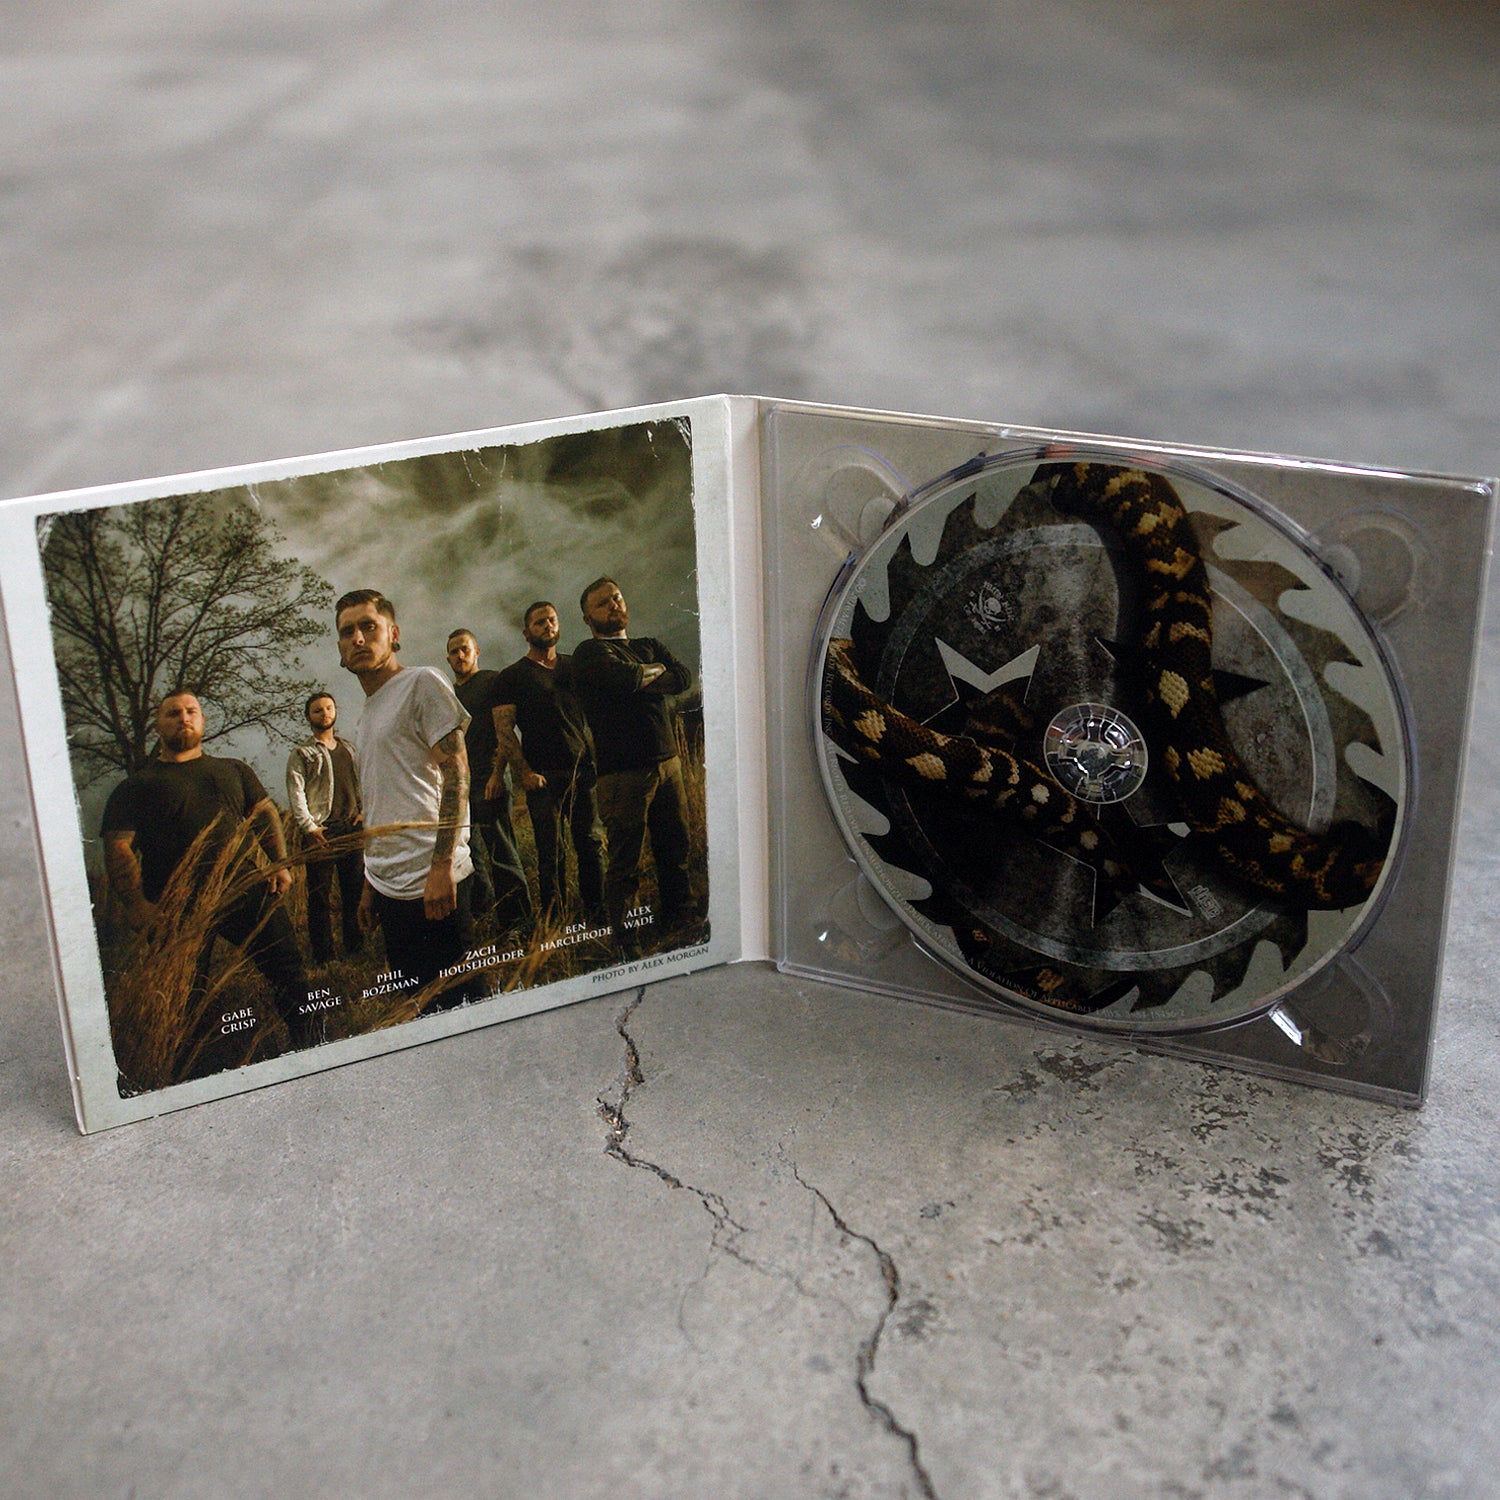 image of the inside of an opened gatefold CD on a concrete floor. The inside left is a photo of the six male members of the band, Whitechapel standing outside in front of a tree, the right shows the CD with a sawblade and snake on the CD